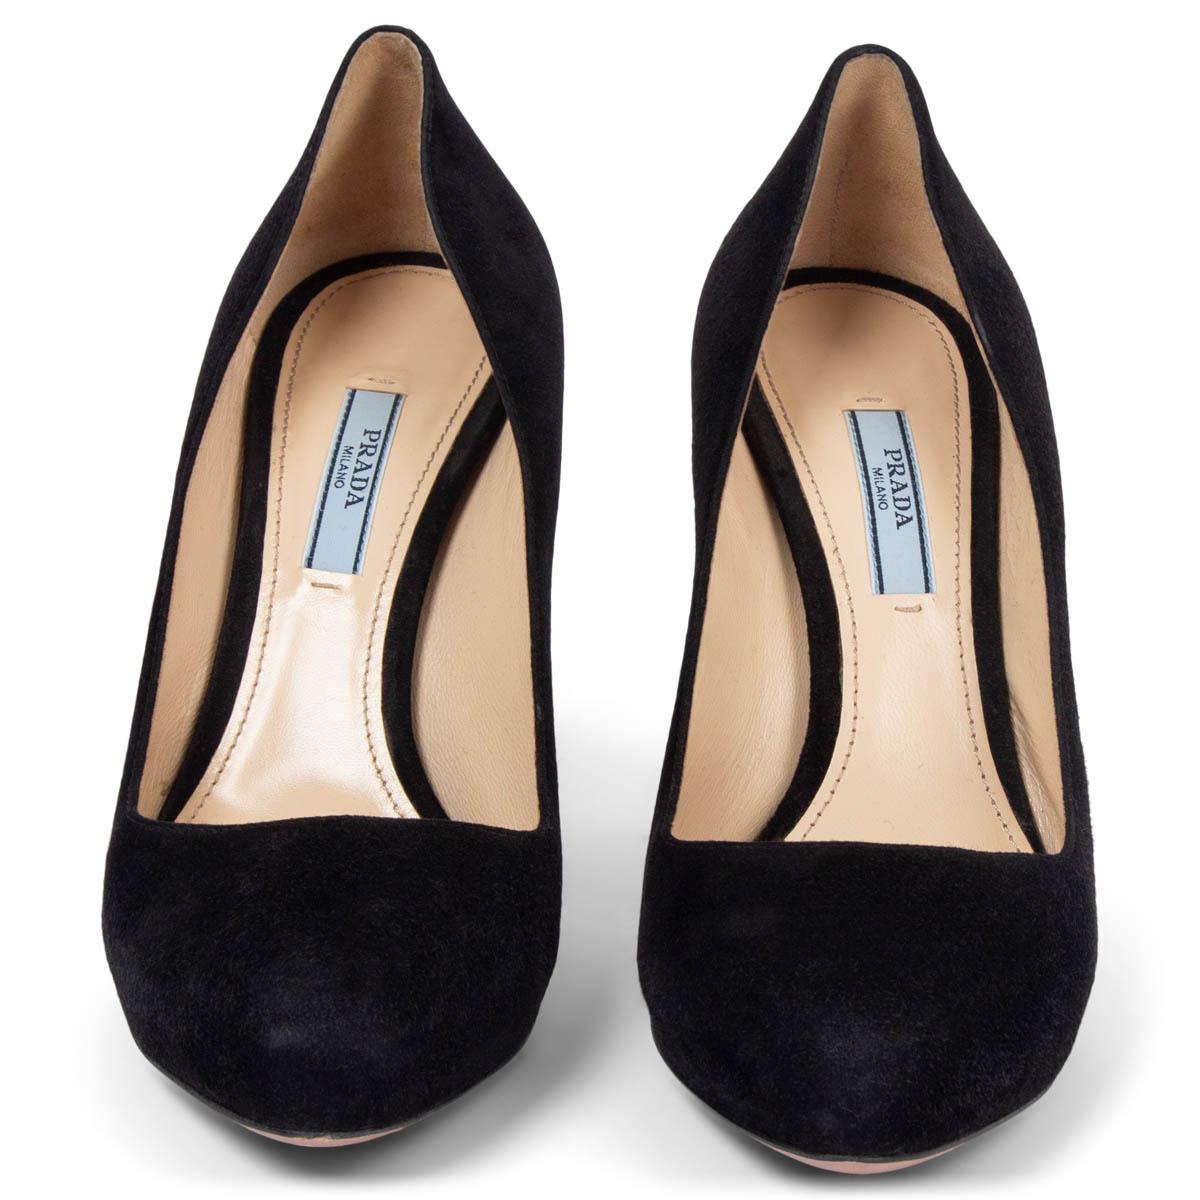 100% authentic Prada almond-toe pumps in black suede with hidden platform. Have been worn and are in excellent condition. Come with dust bag. 

Measurements
Imprinted Size	39.5
Shoe Size	39.5
Inside Sole	26cm (10.1in)
Width	7.5cm (2.9in)
Heel	10cm